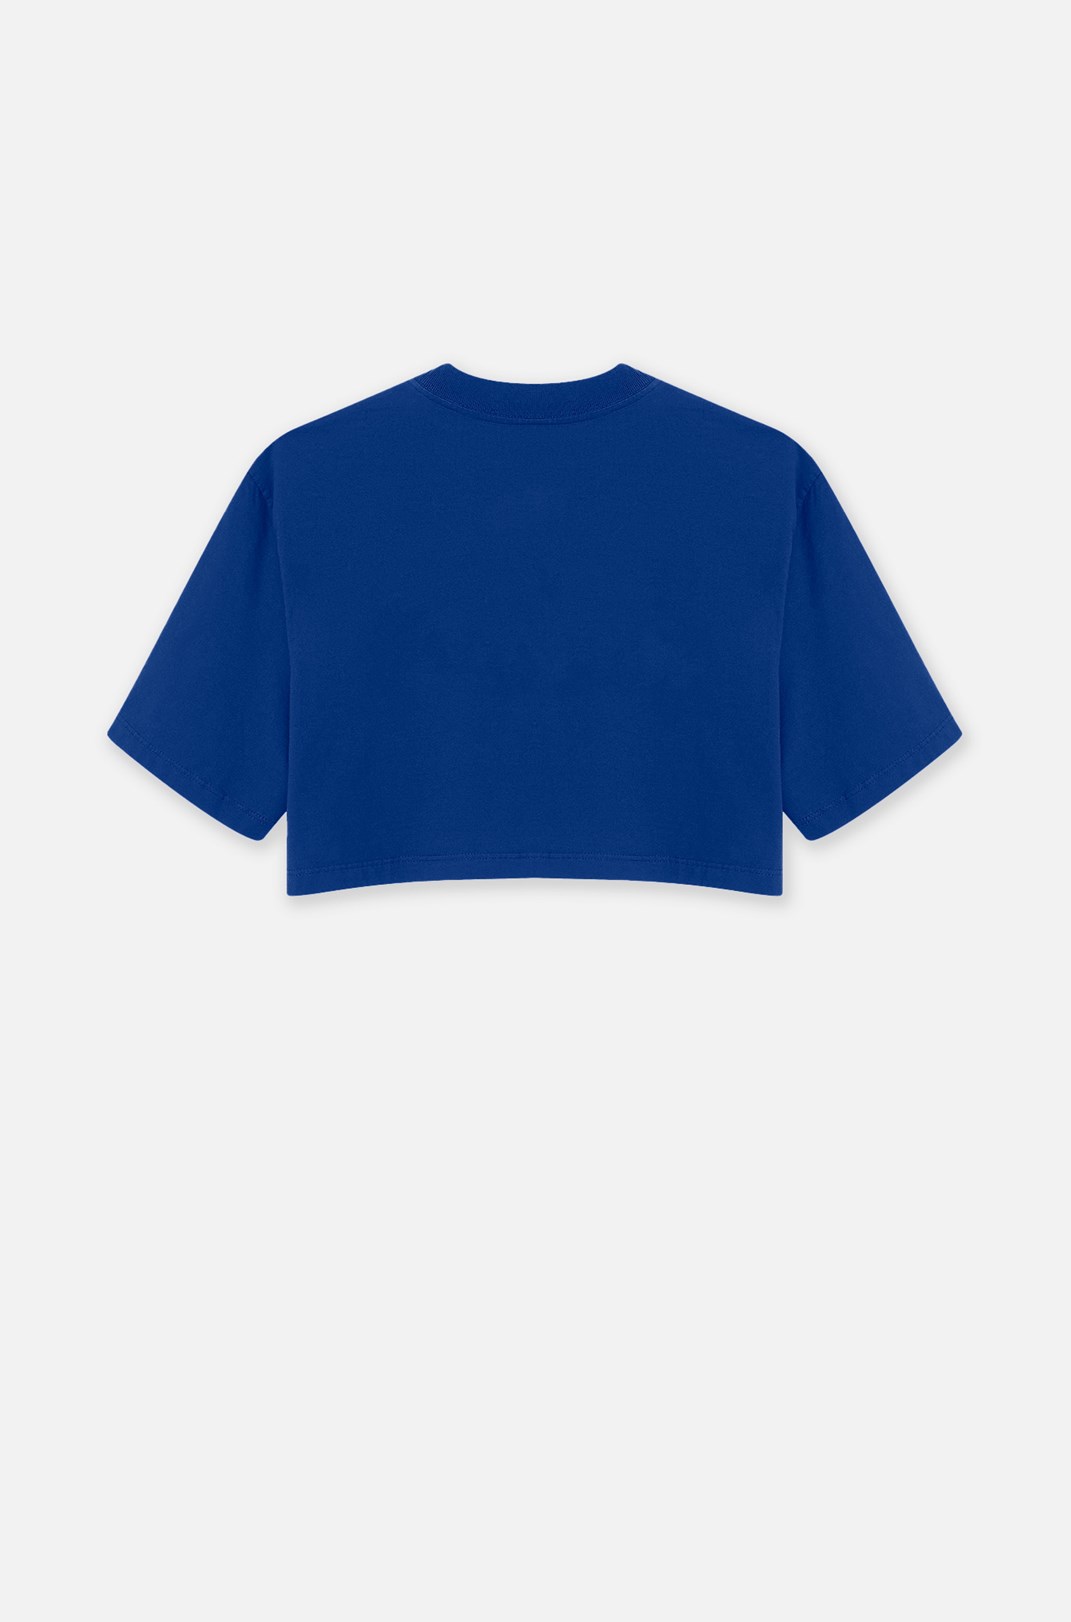 Cropped Bold Approve Keep It Together Azul Azul